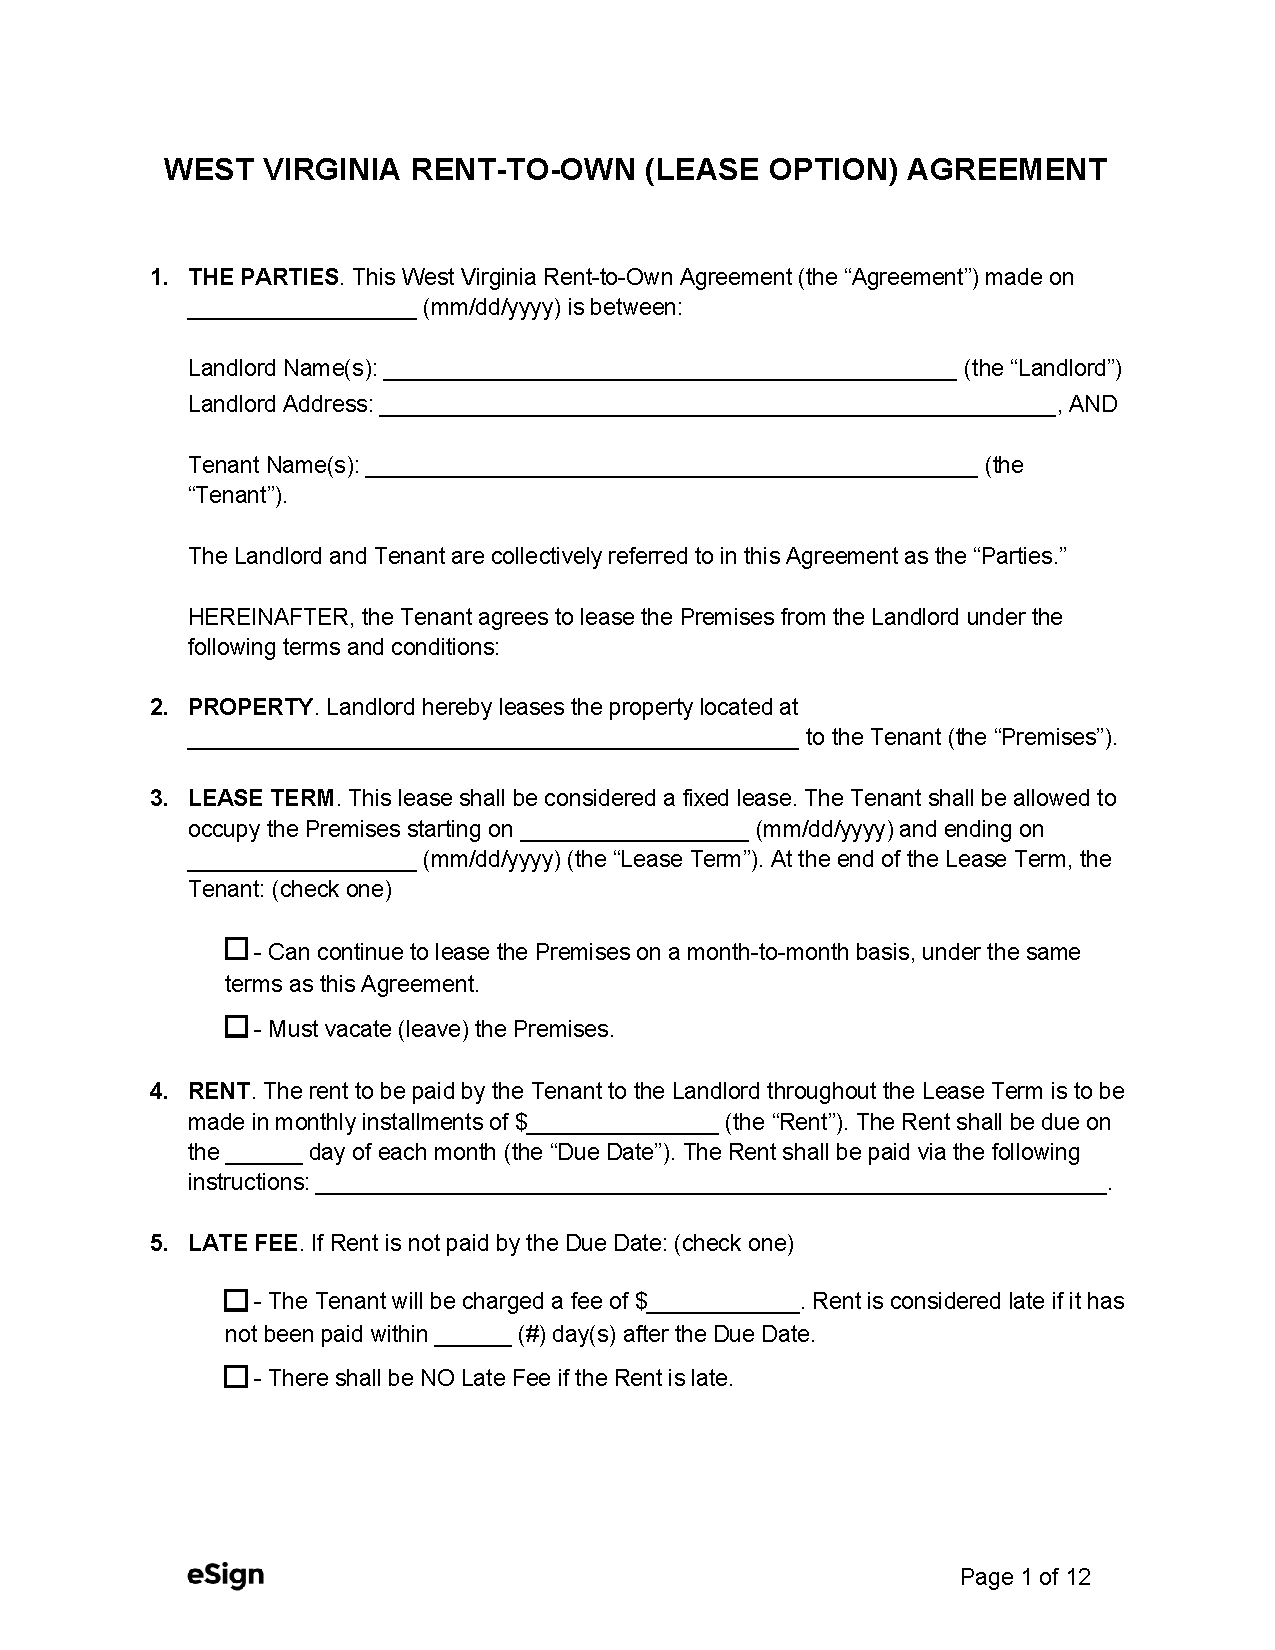 Free West Virginia Rent to Own Lease Option Agreement PDF Word